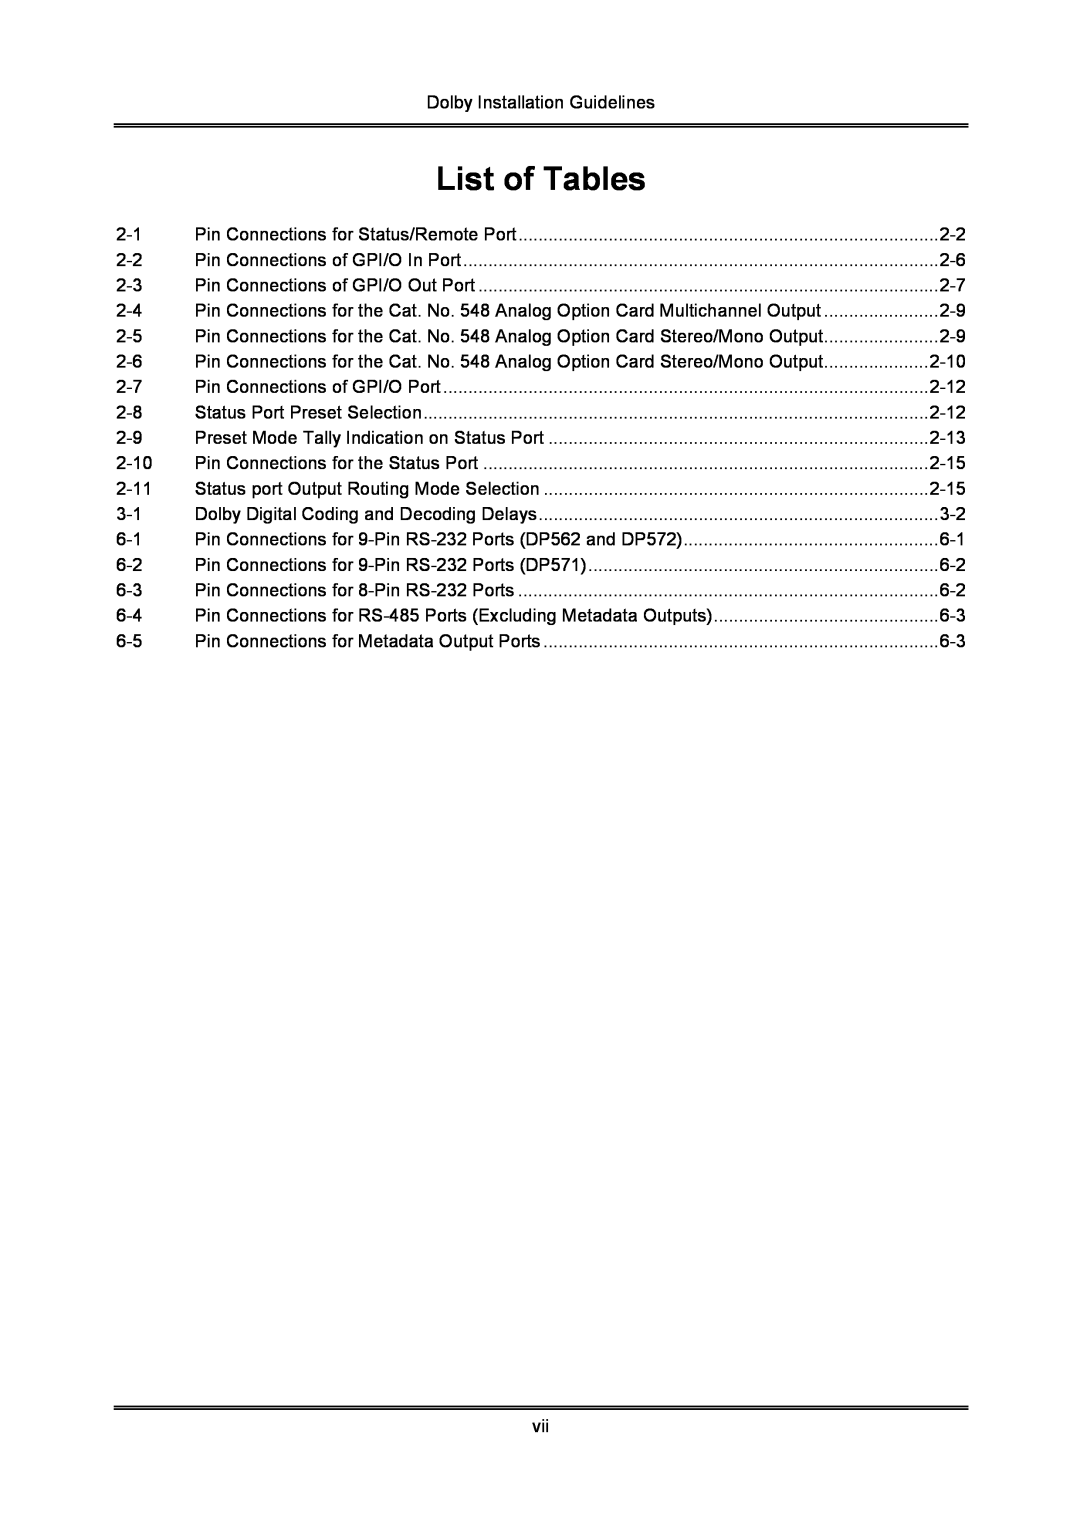 Dolby Laboratories S01/13621 manual List of Tables 